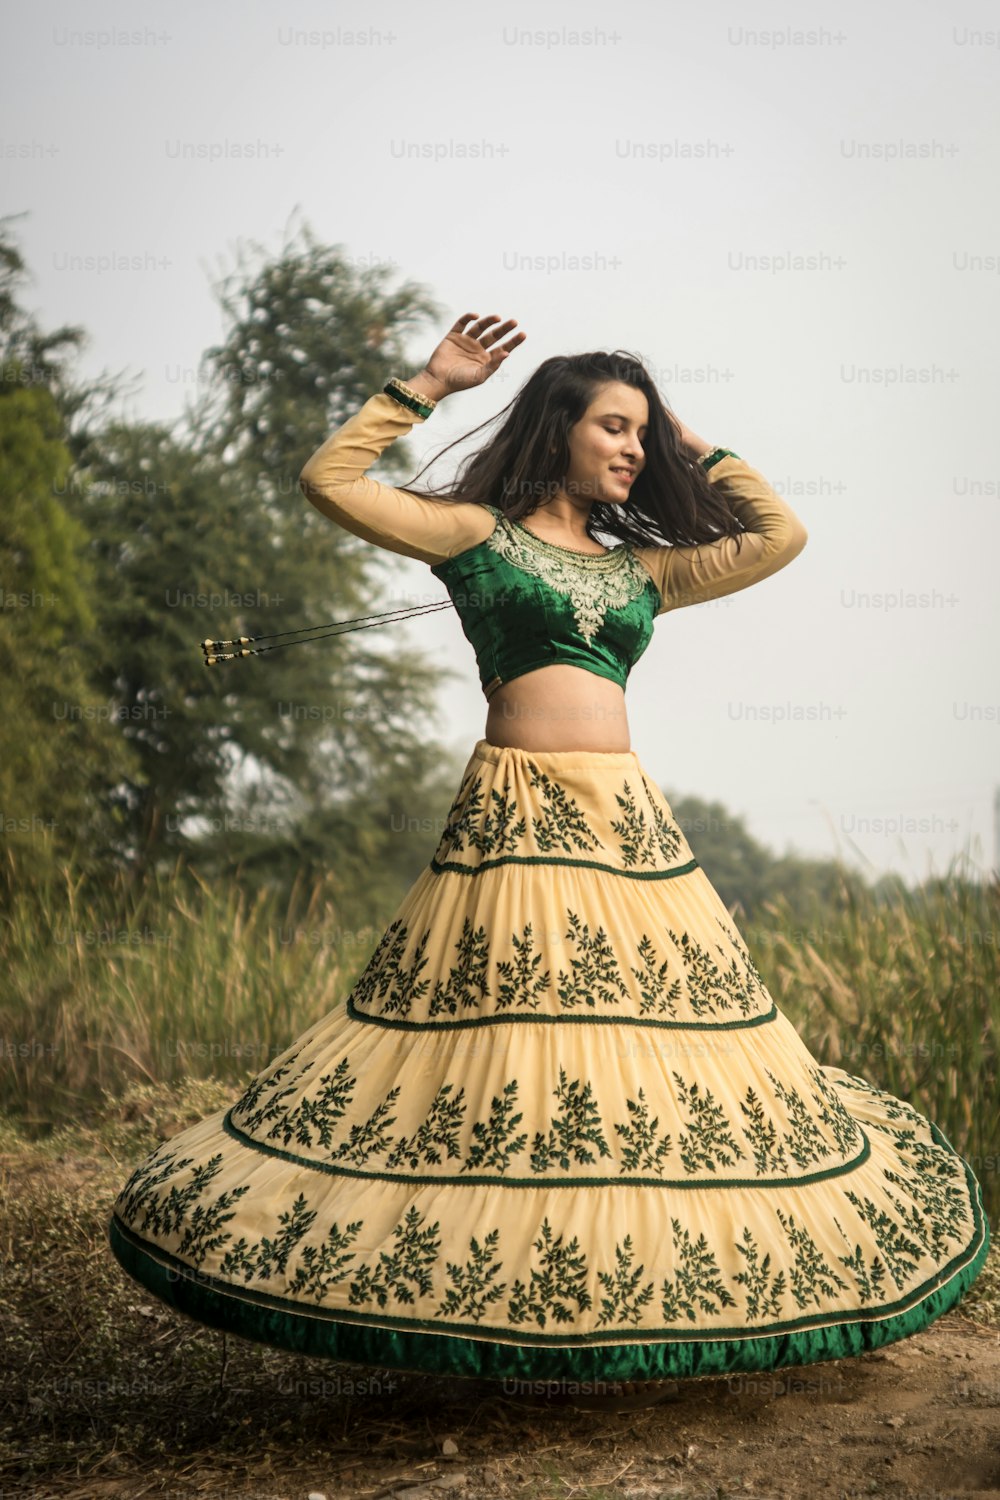 Best Ethnic Women Models Royalty-Free Images, Stock Photos & Pictures